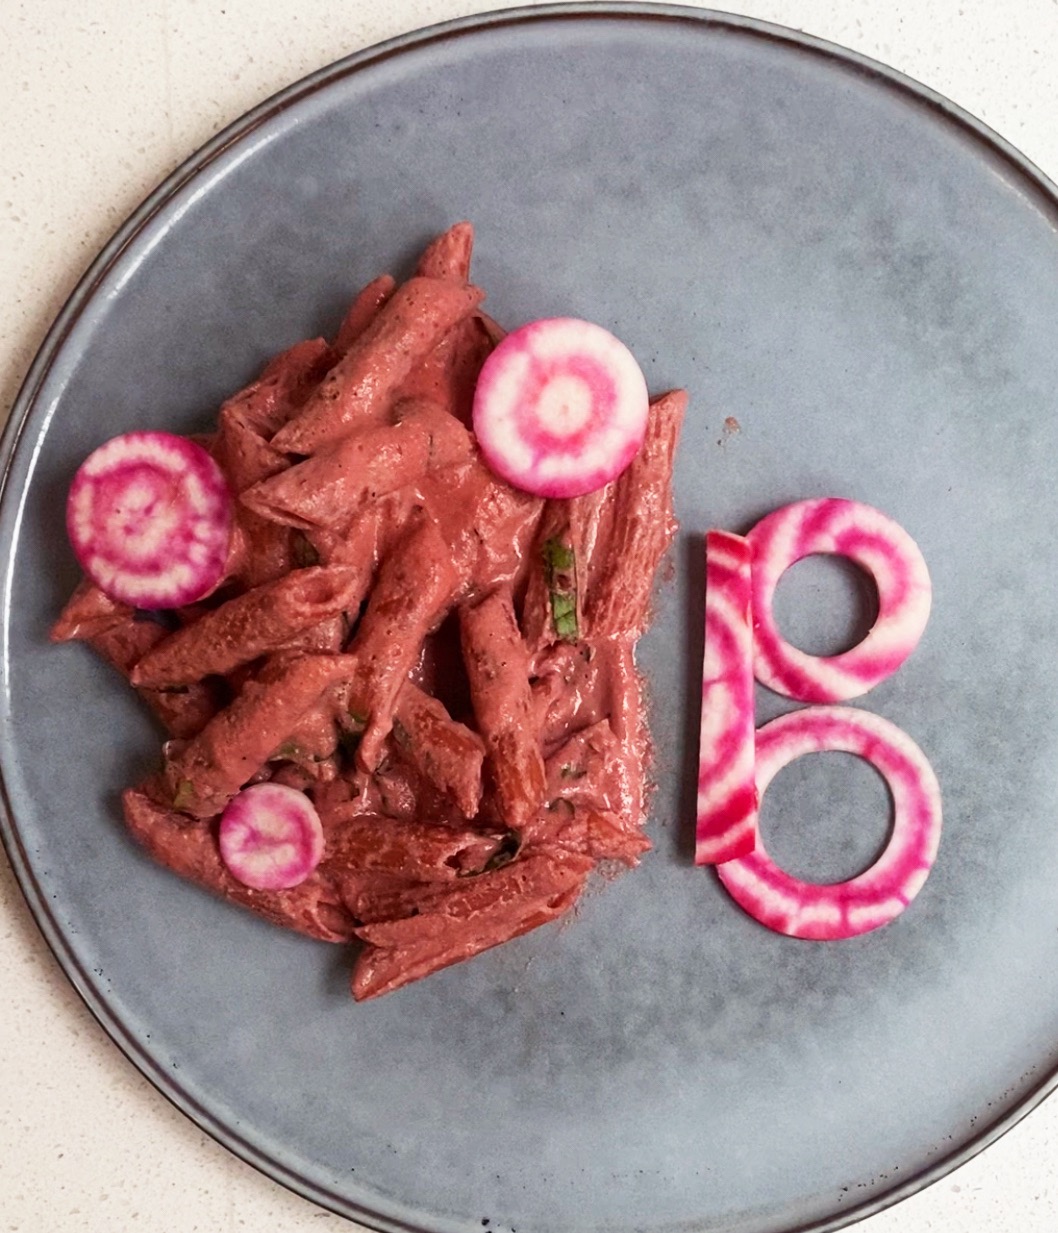 pink pasta with a beet cut into a B shape